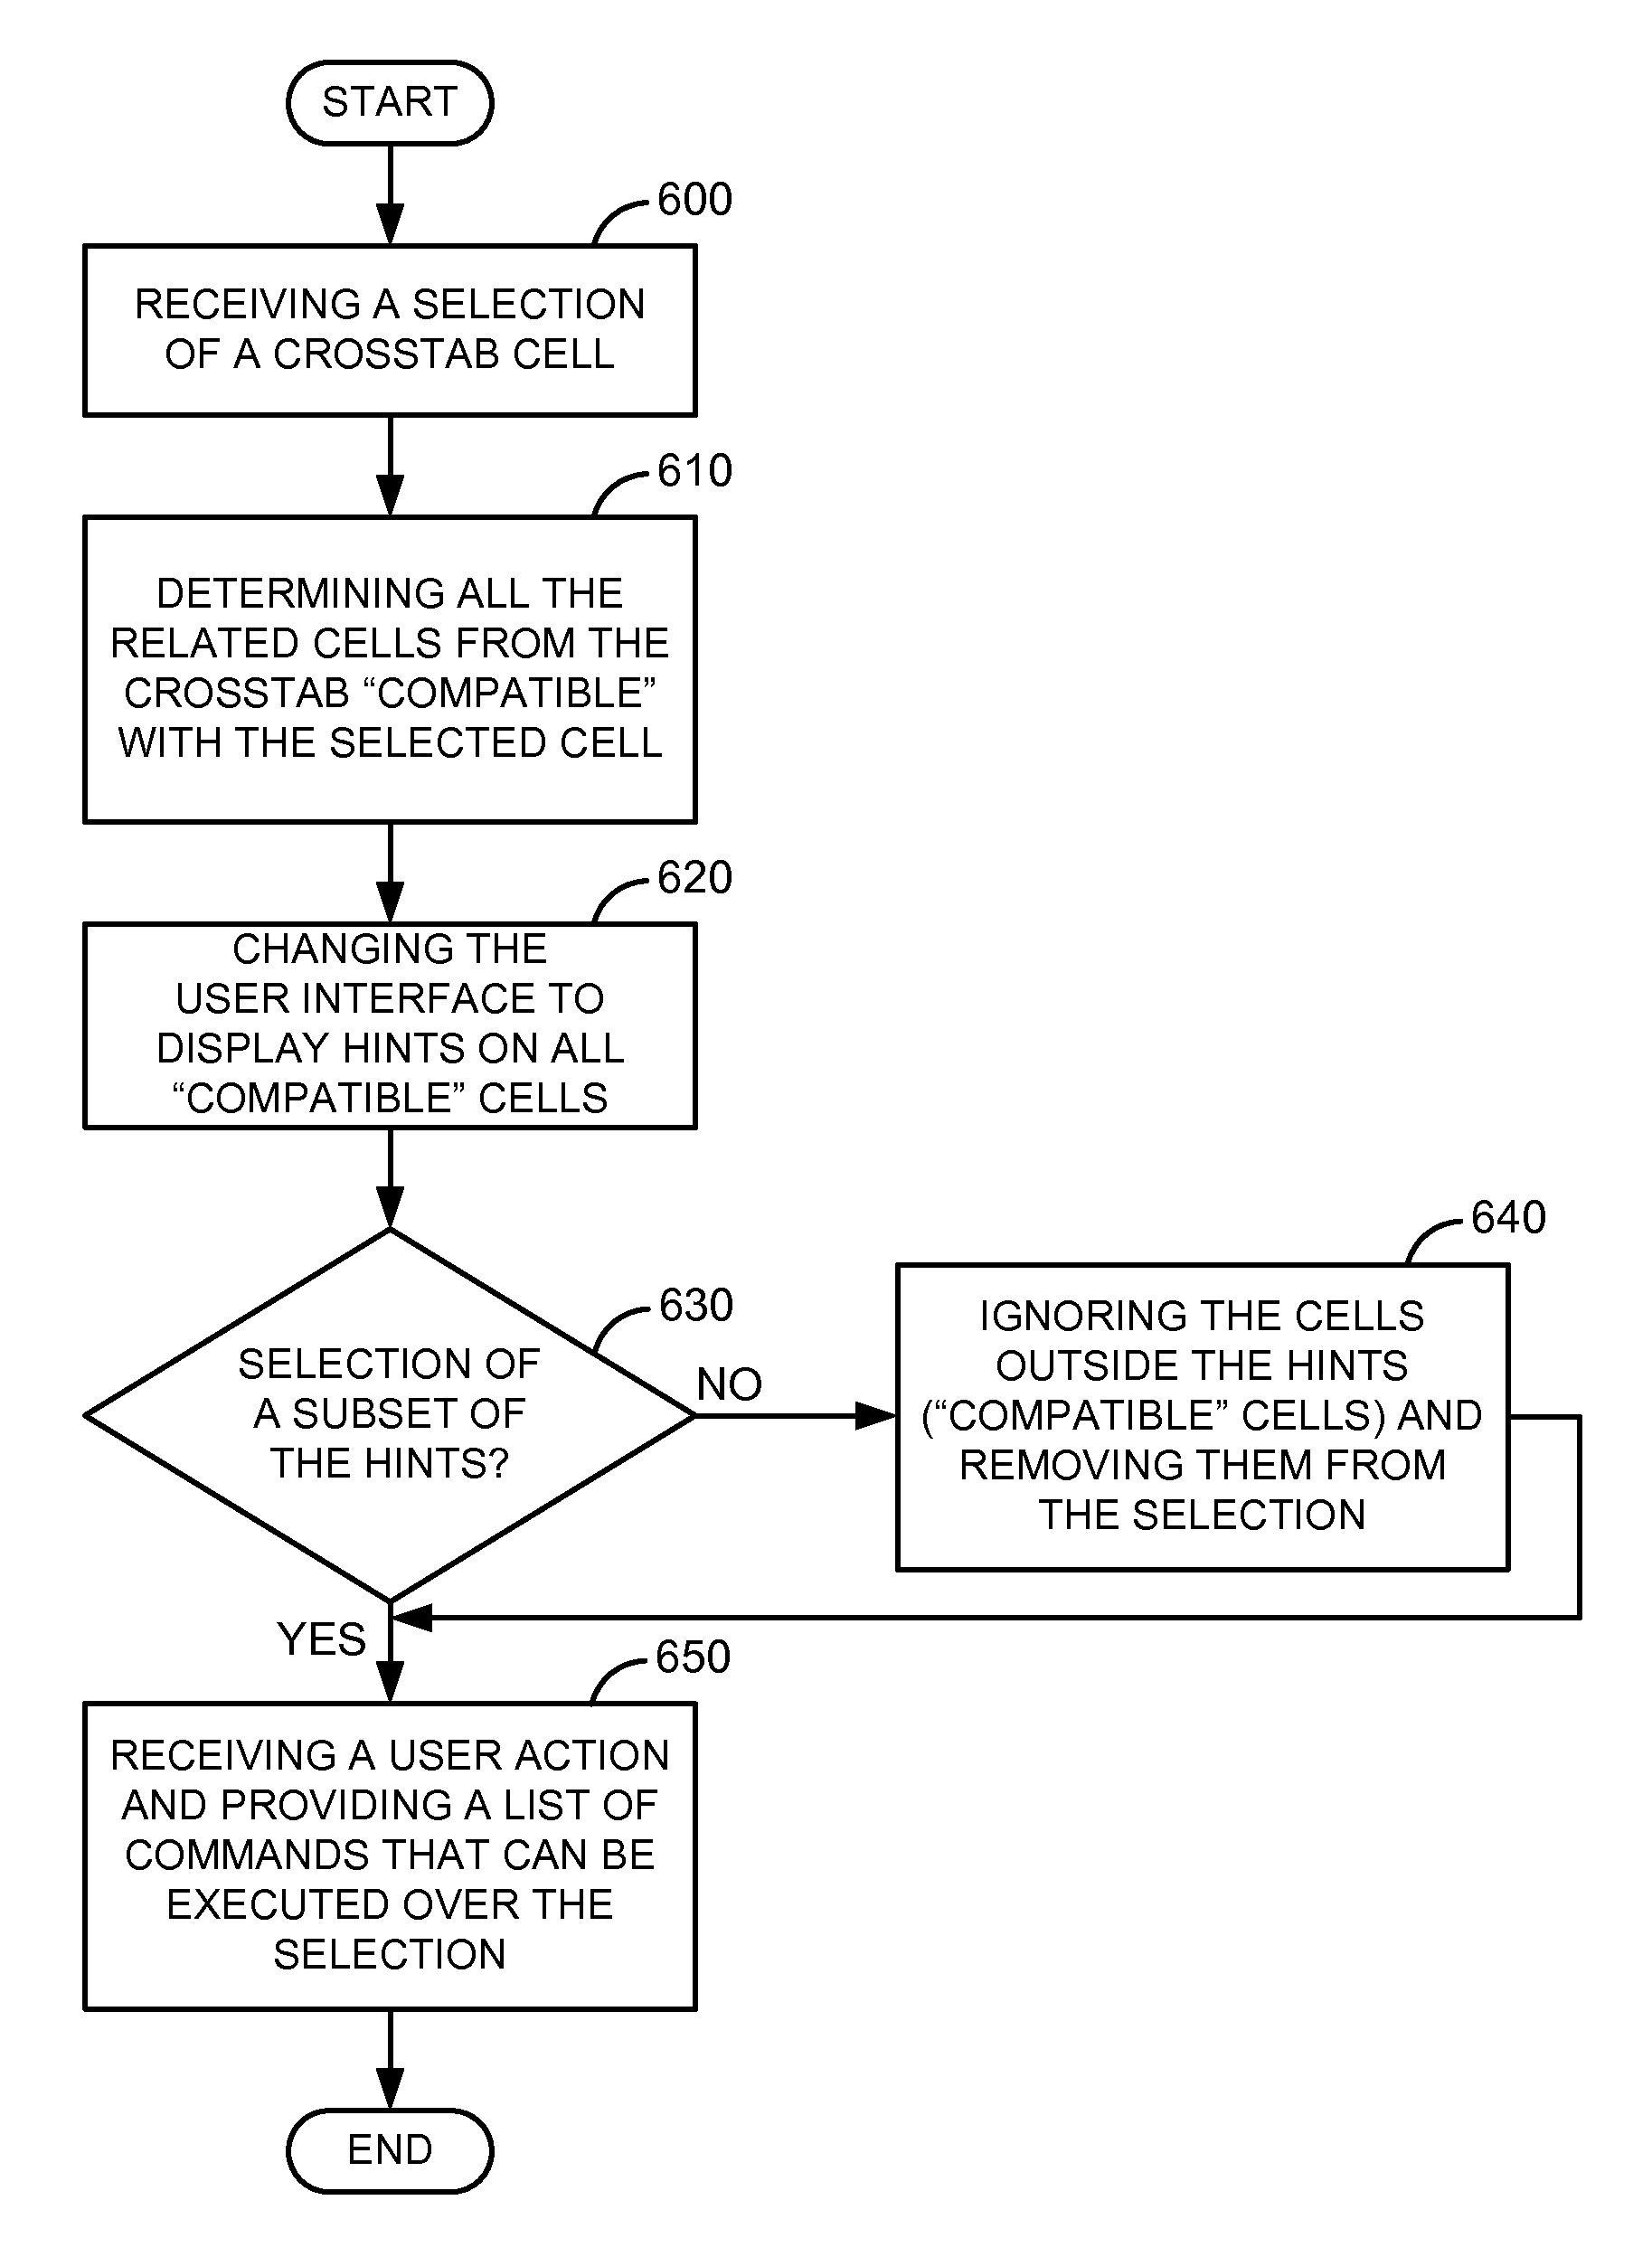 Aggregation level and measure based hinting and selection of cells in a data display